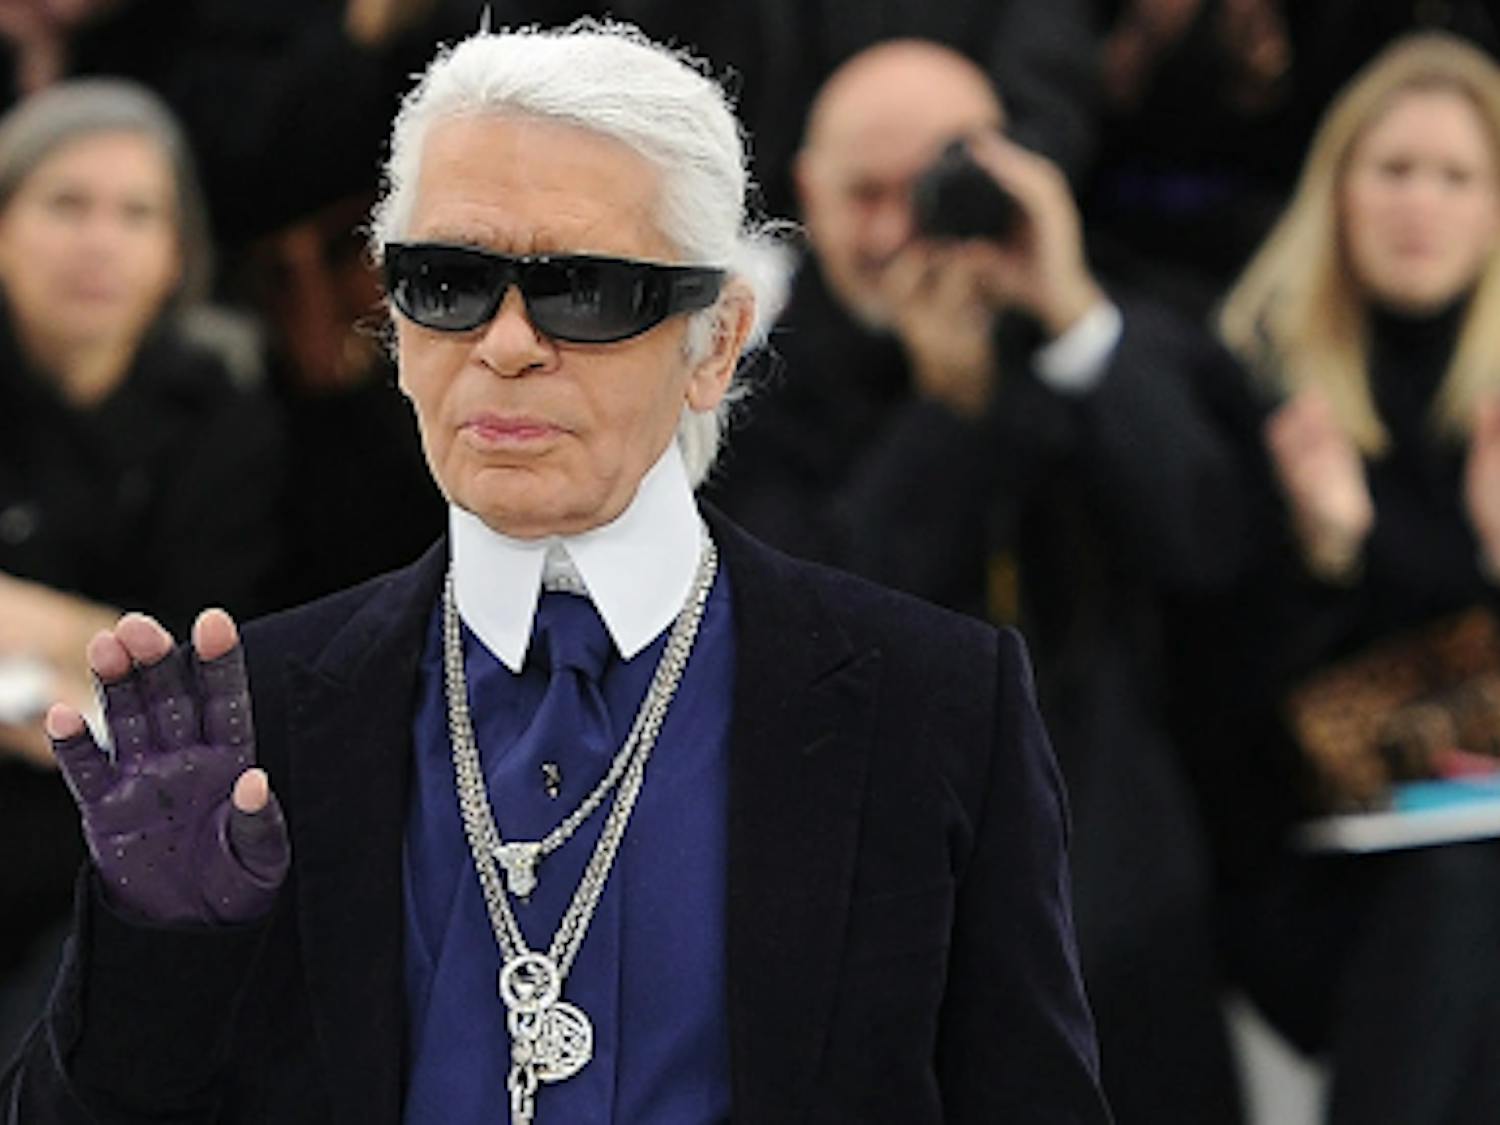 Karl Lagerfeld in his iconic sunglasses and chains | Courtesy: Getty Images, Pascal Le Segretain